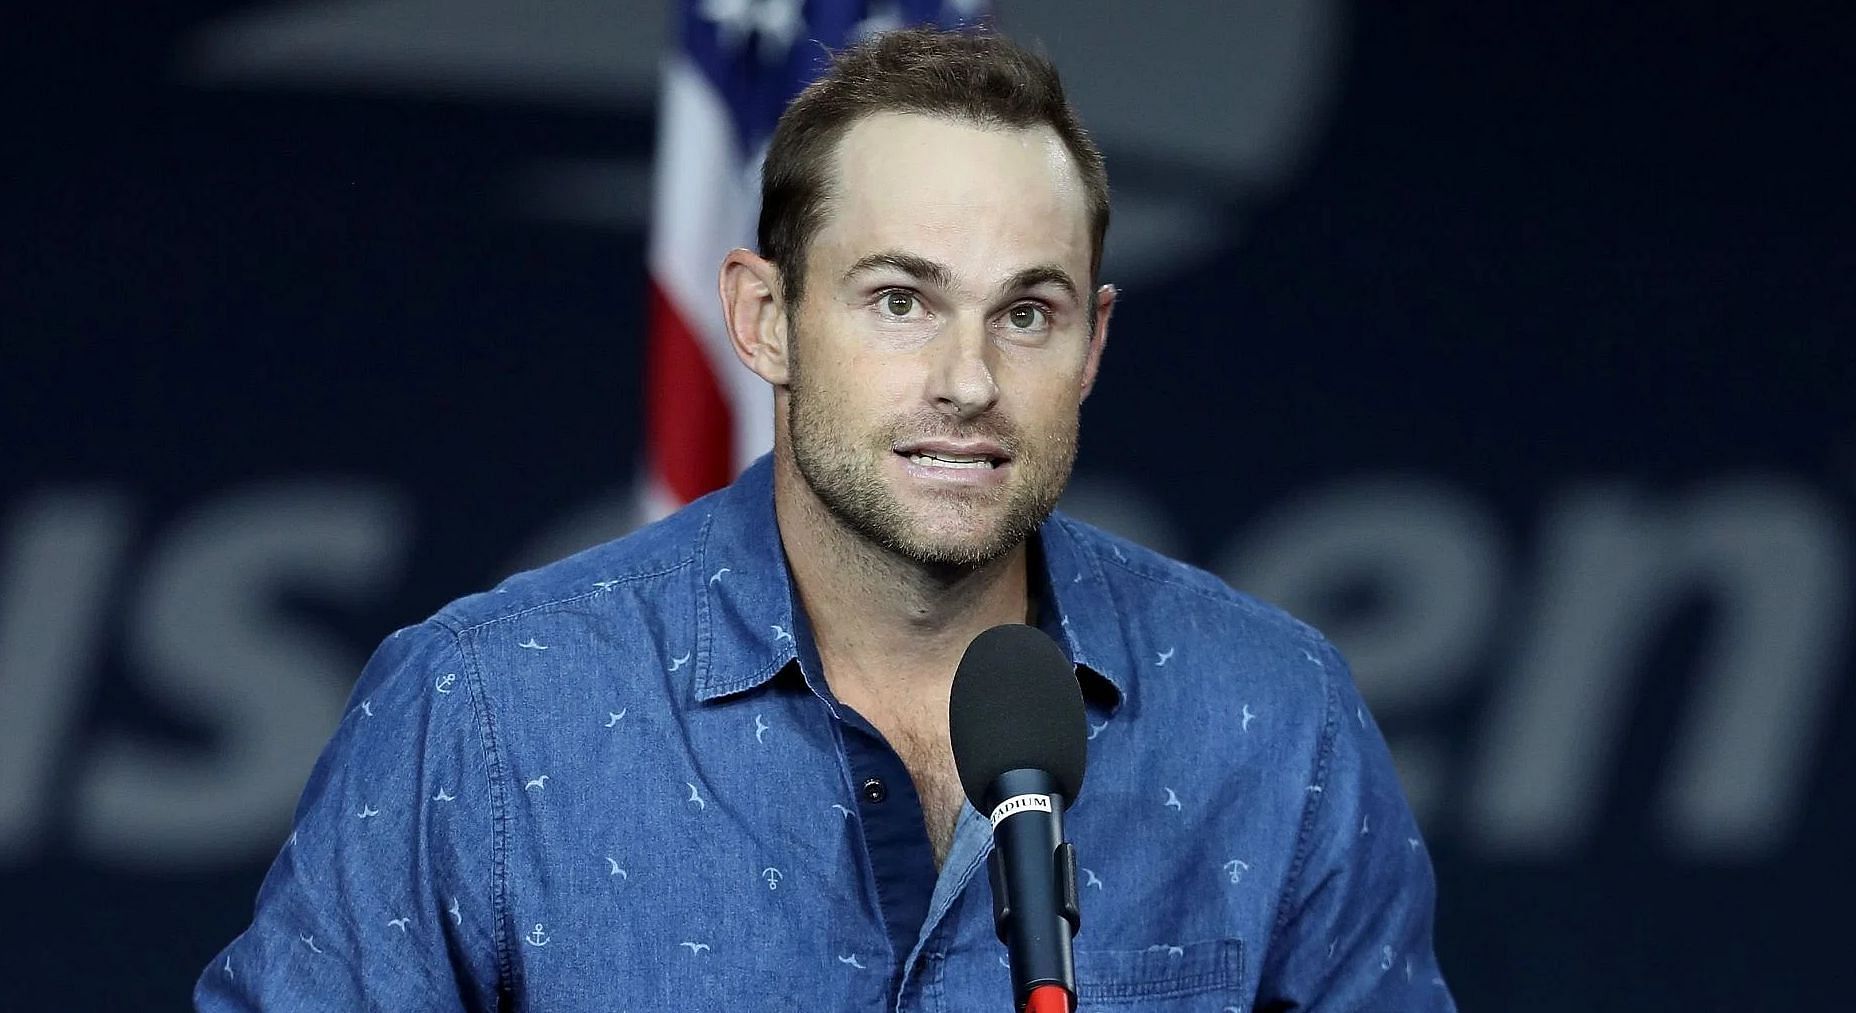 Andy Roddick won the US Open in 2003.